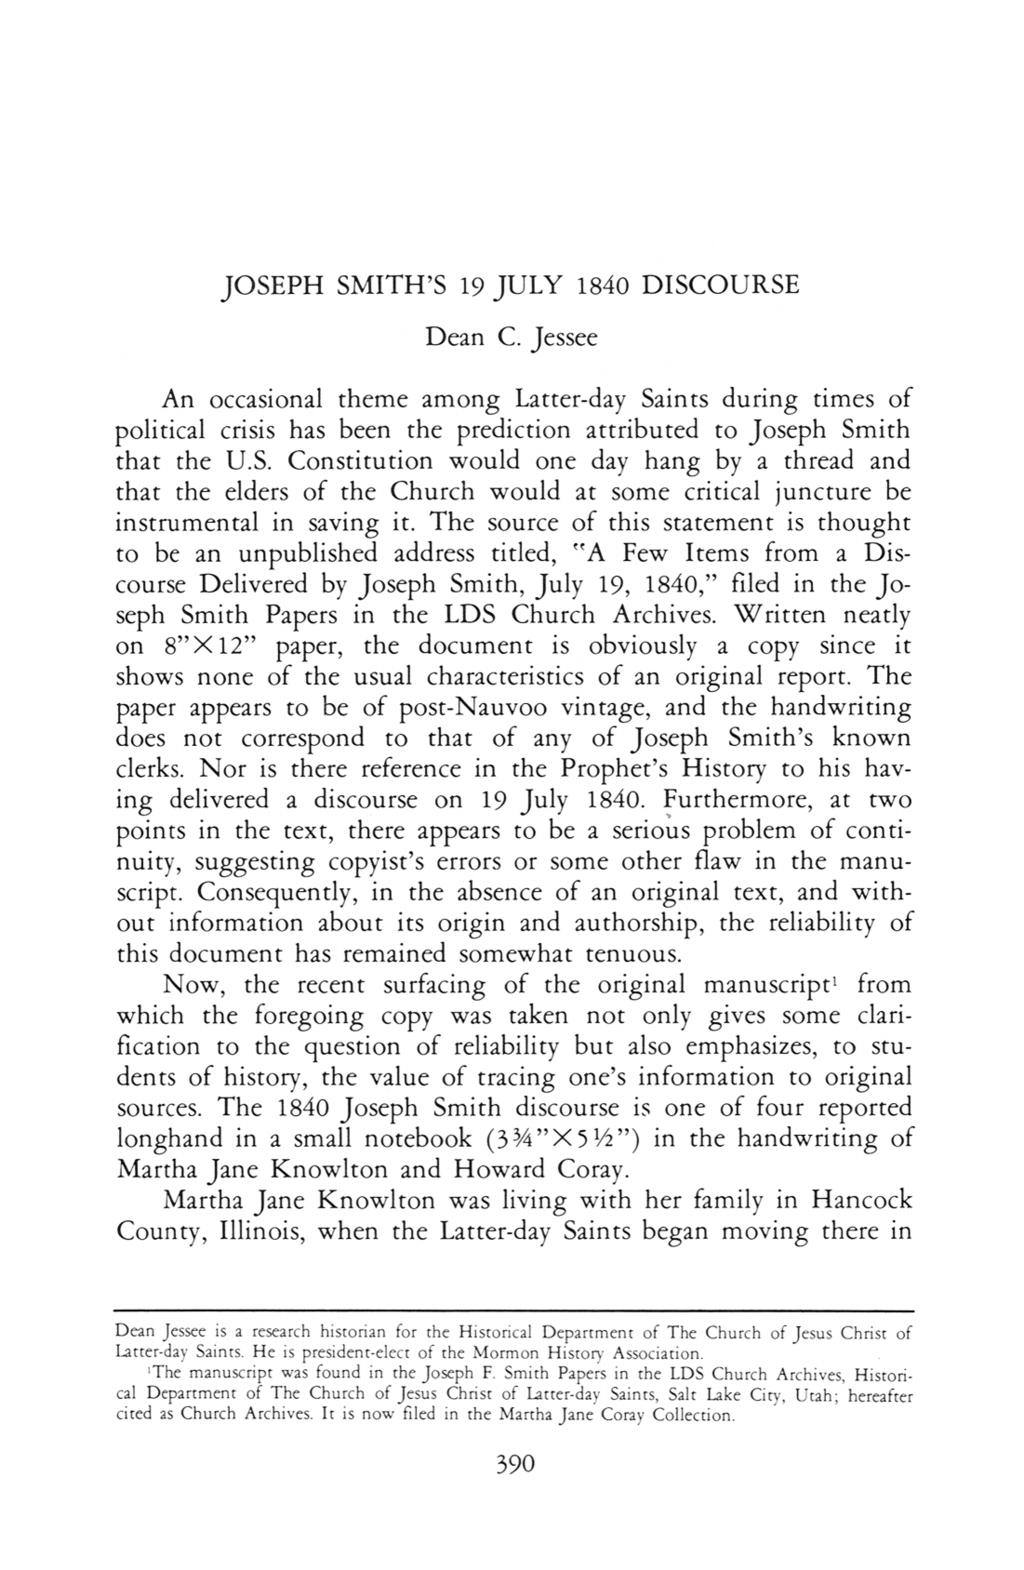 Jessee: Joseph Smith's 19 July 1840 Discourse JOSEPH SMITHS 19 JULY 1840 DISCOURSE dean C jessee an occasional theme among latter day saints during times of political crisis has been the prediction